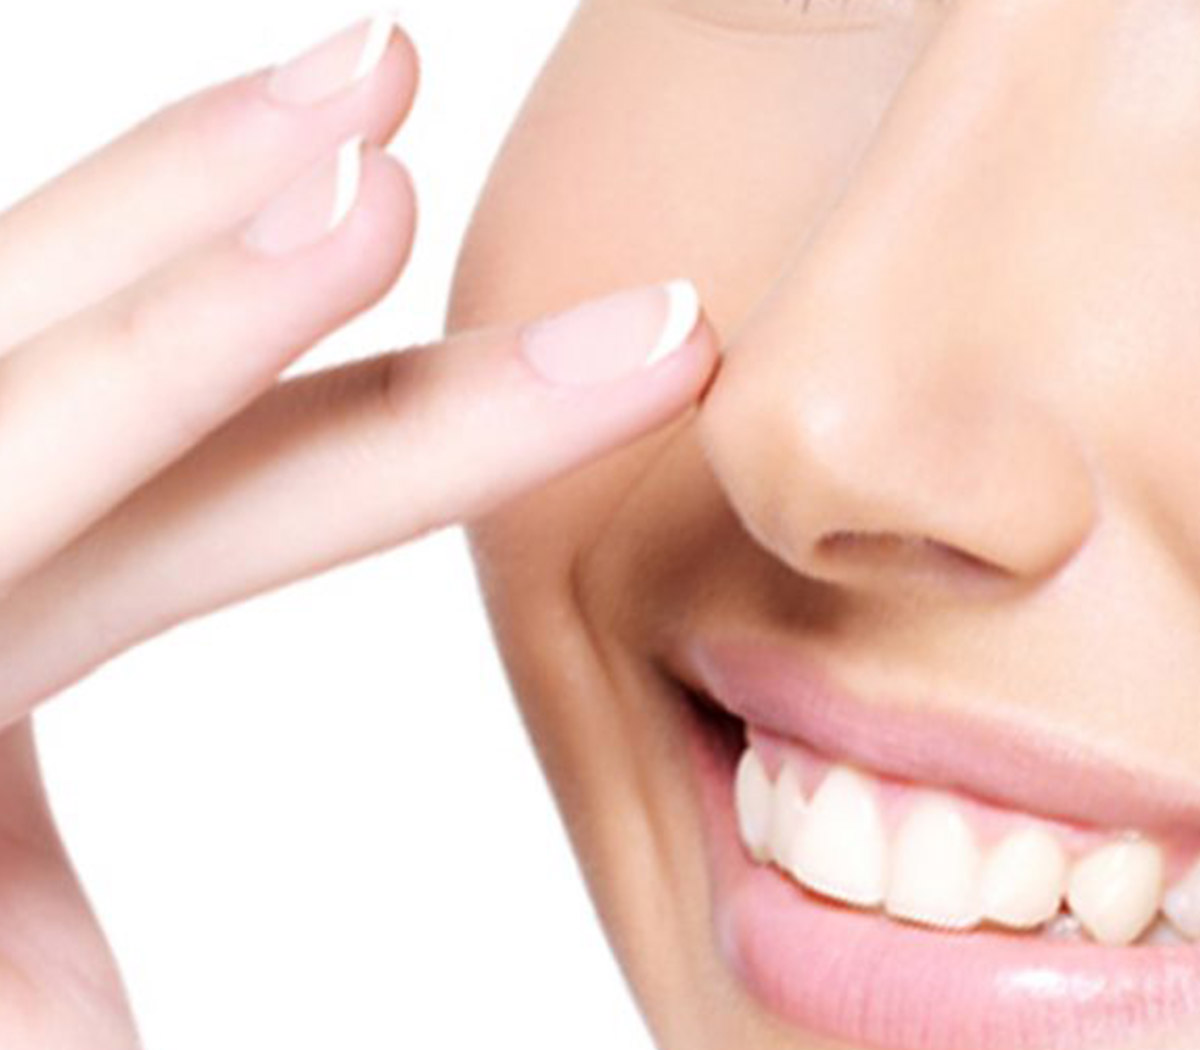 what does rhinoplasty cost in bangalore, india?